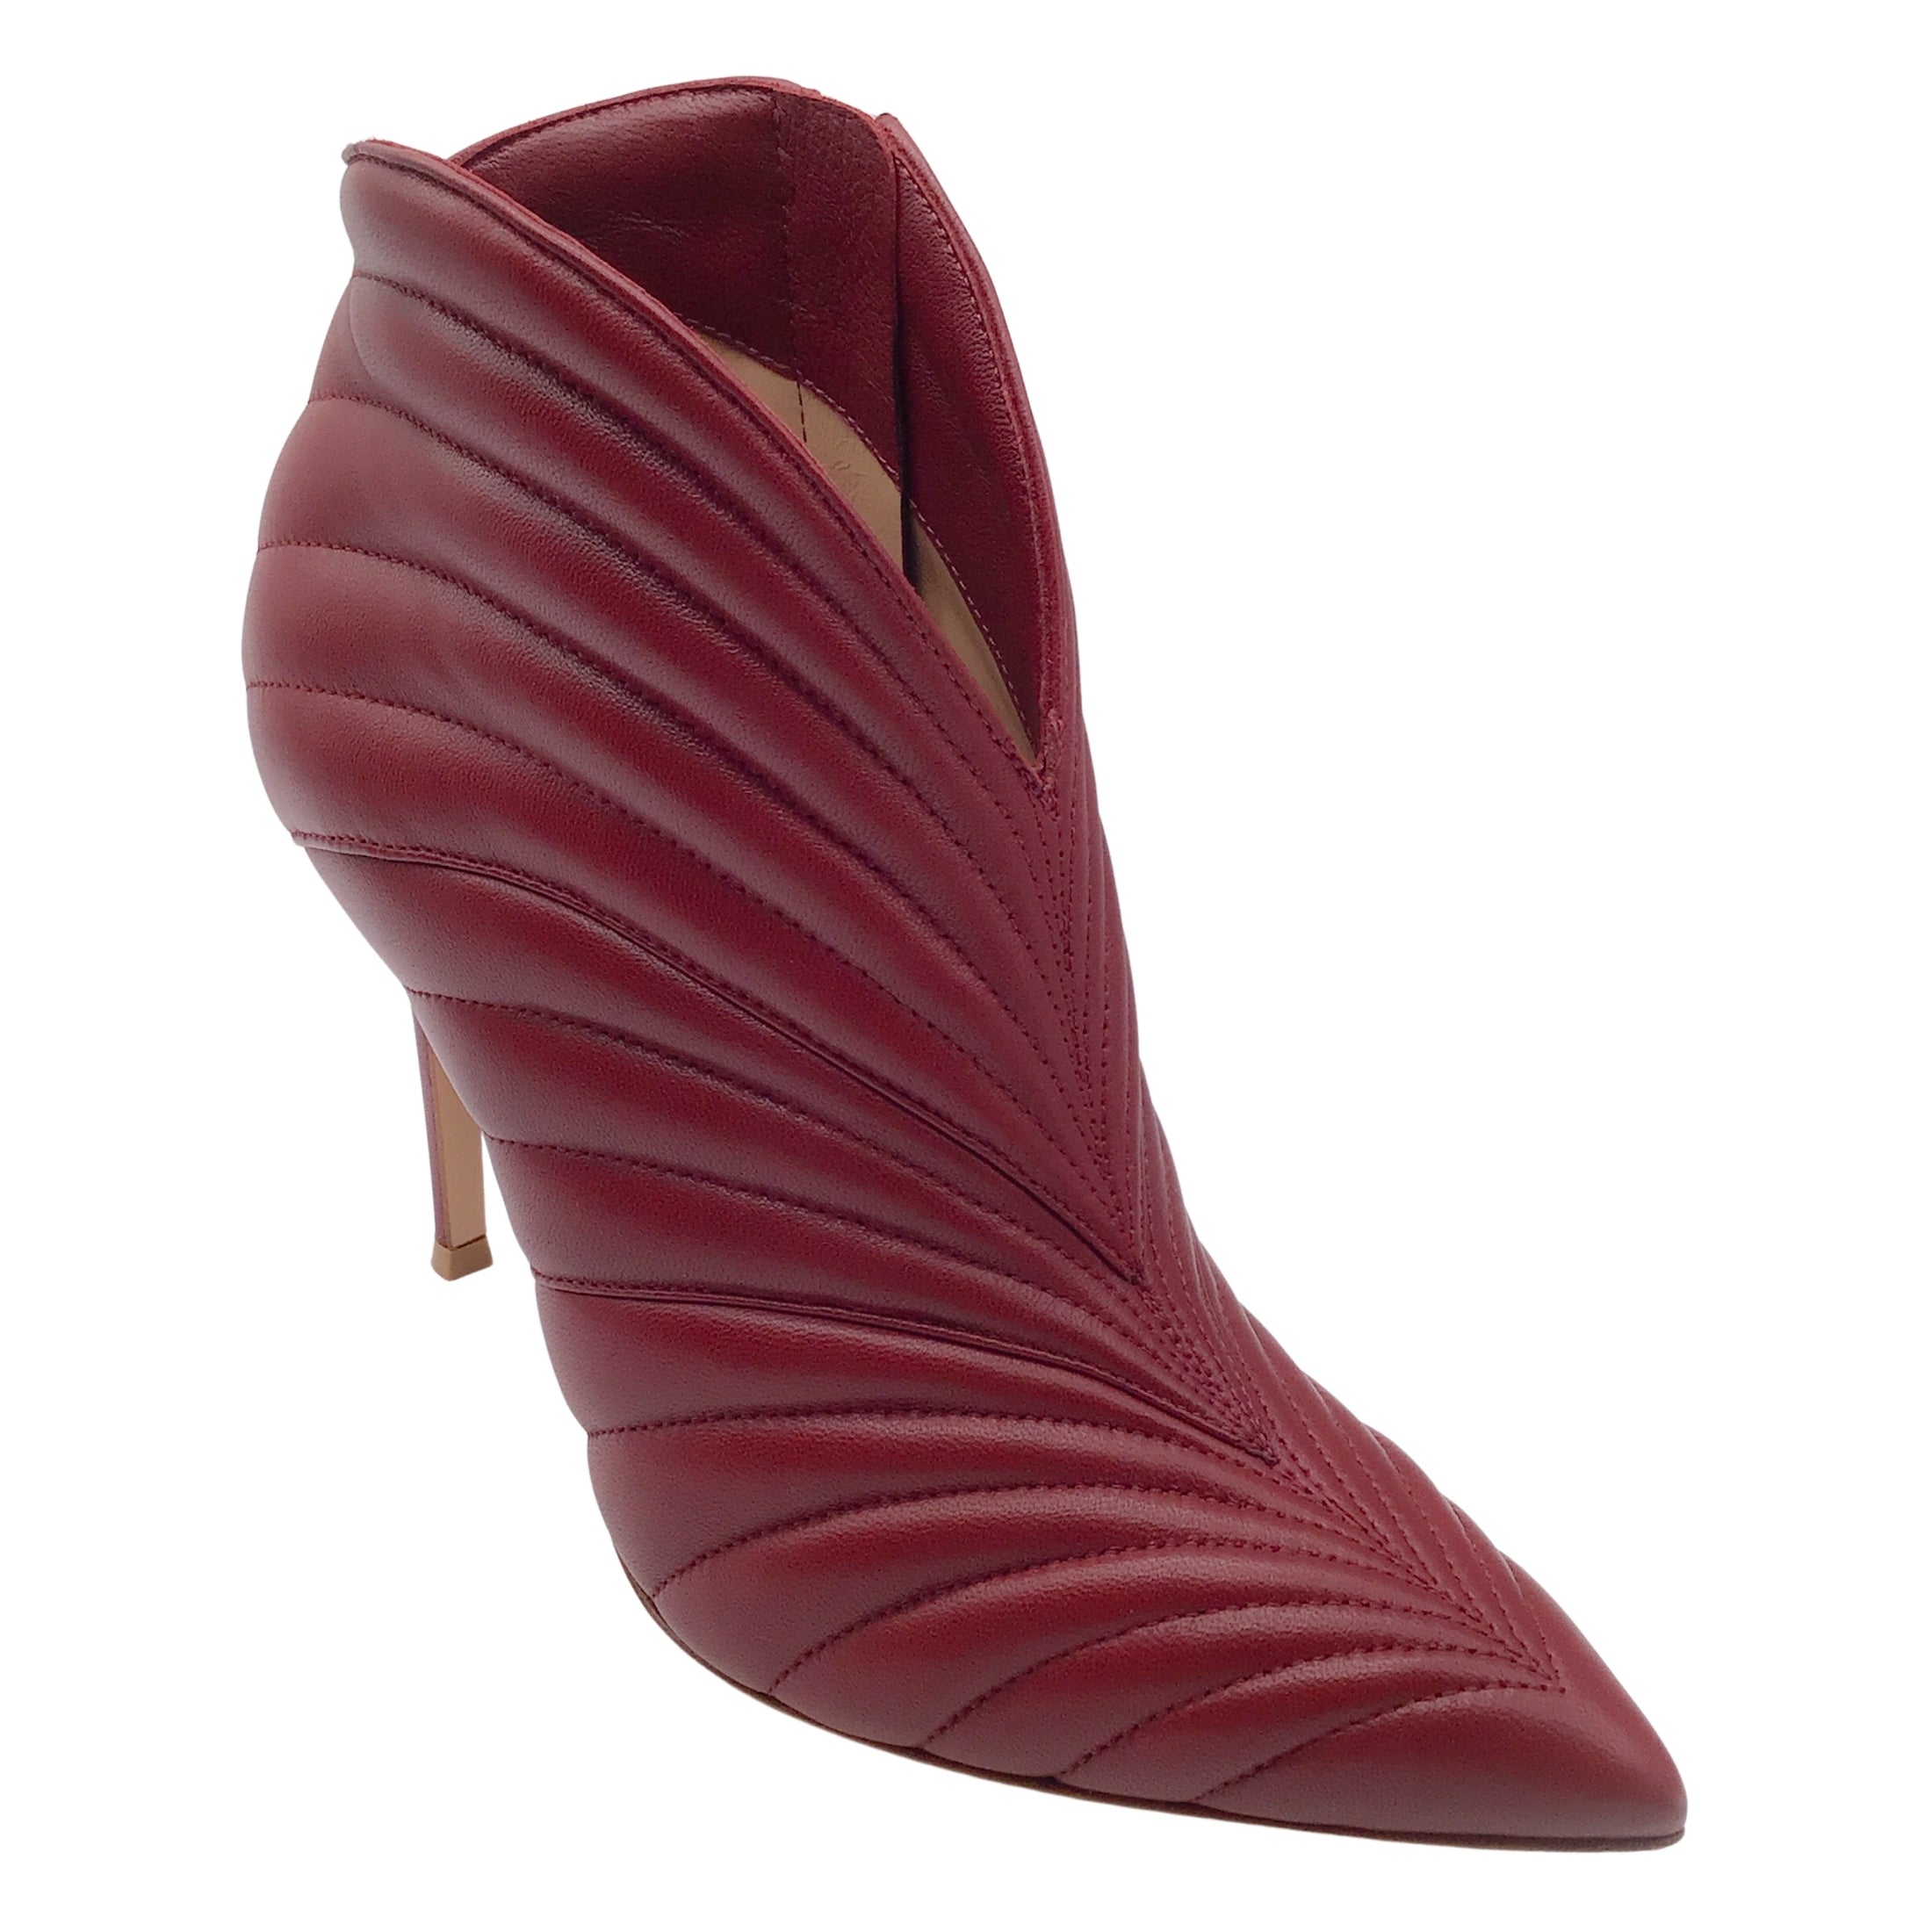 Gianvito Rossi Syrah Red Eiko Quilted Leather Ankle Boots/Booties